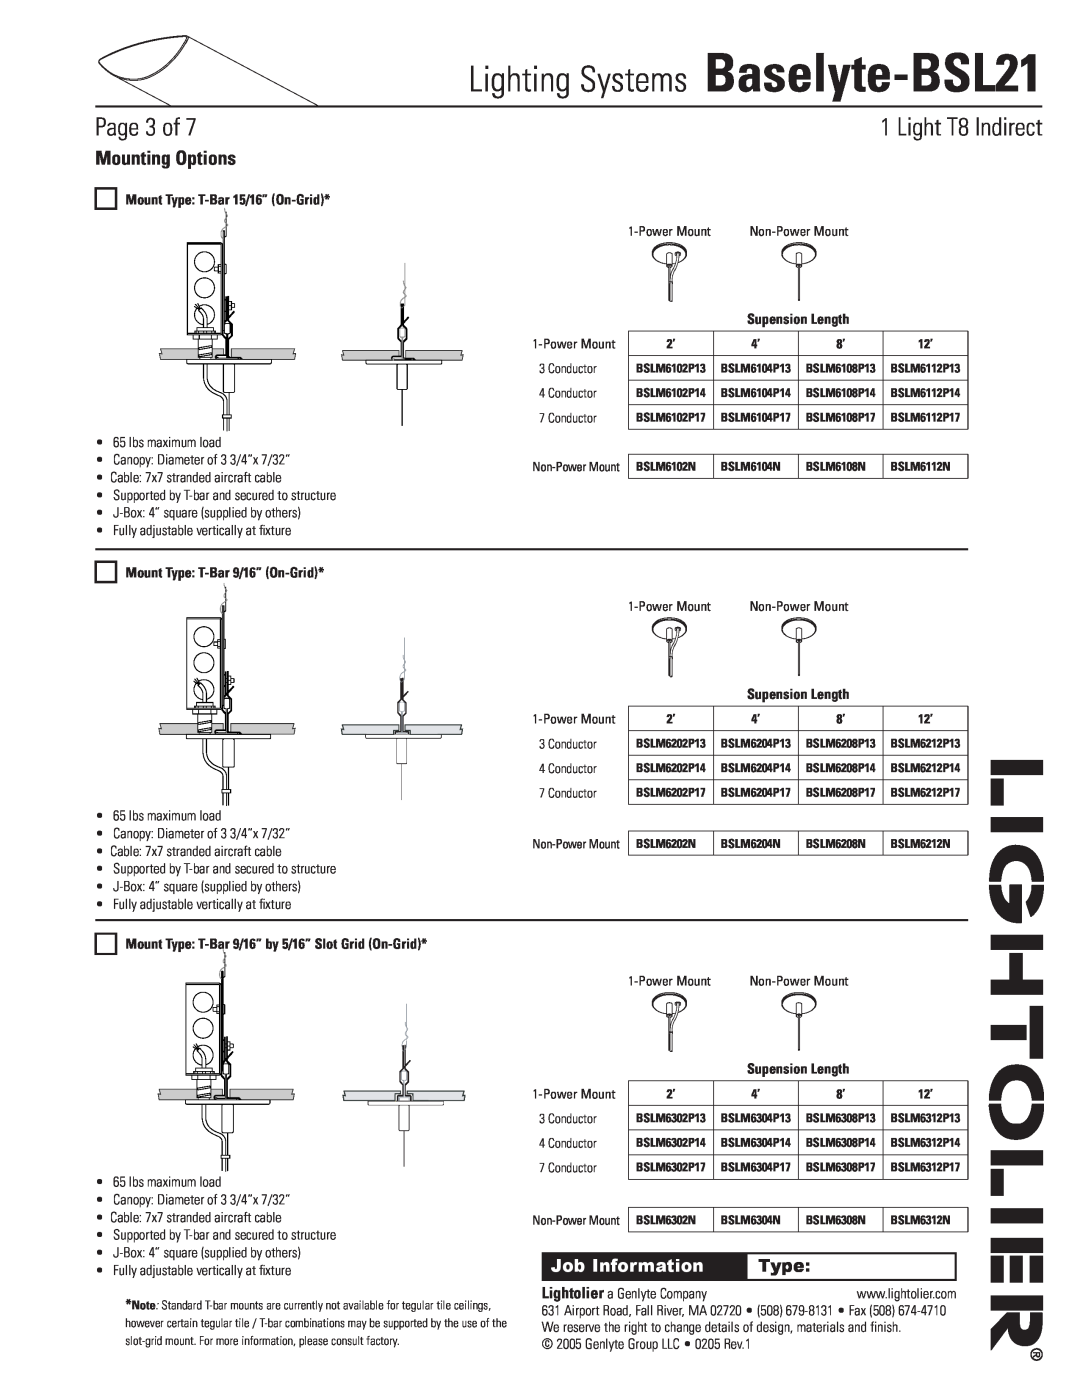 Lightolier Baselyte-BSL21 Mounting Options, Mount Type T-Bar15/16” On-Grid, Supension Length, Page of,  Light T8 Indirect 